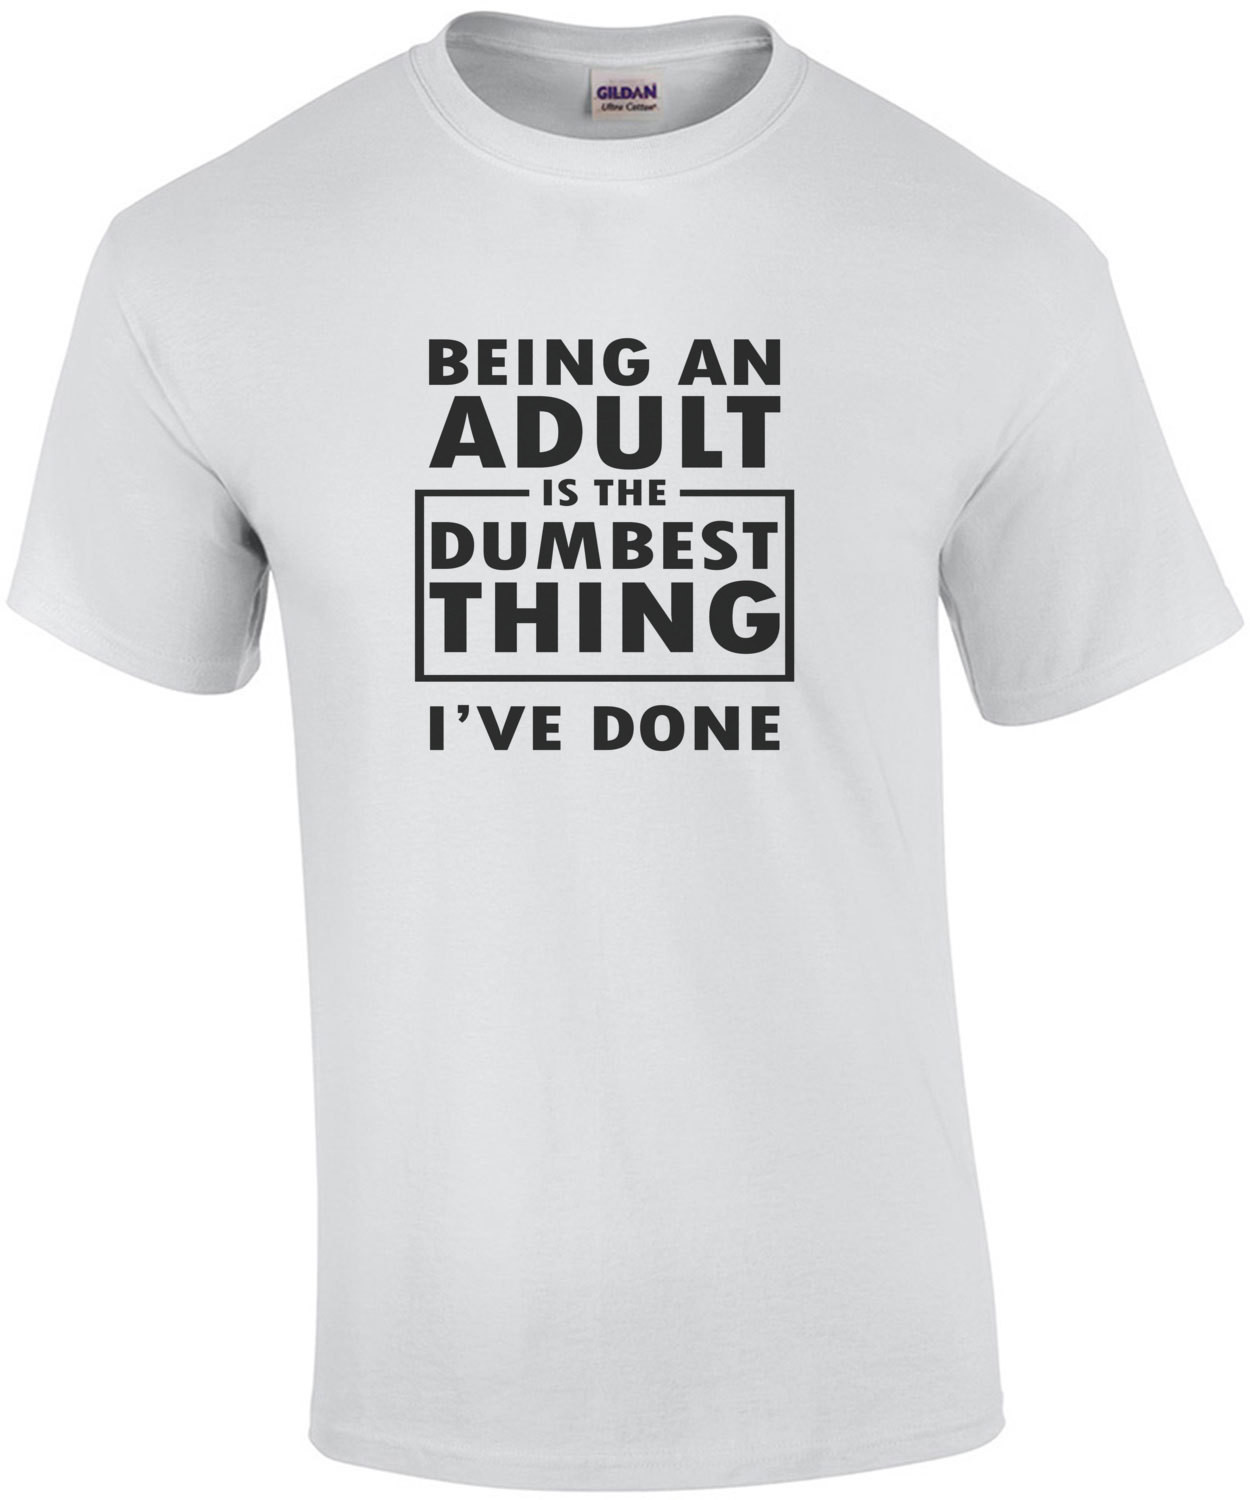 Being an adult is the dumbest thing i've done - funny t-shirt